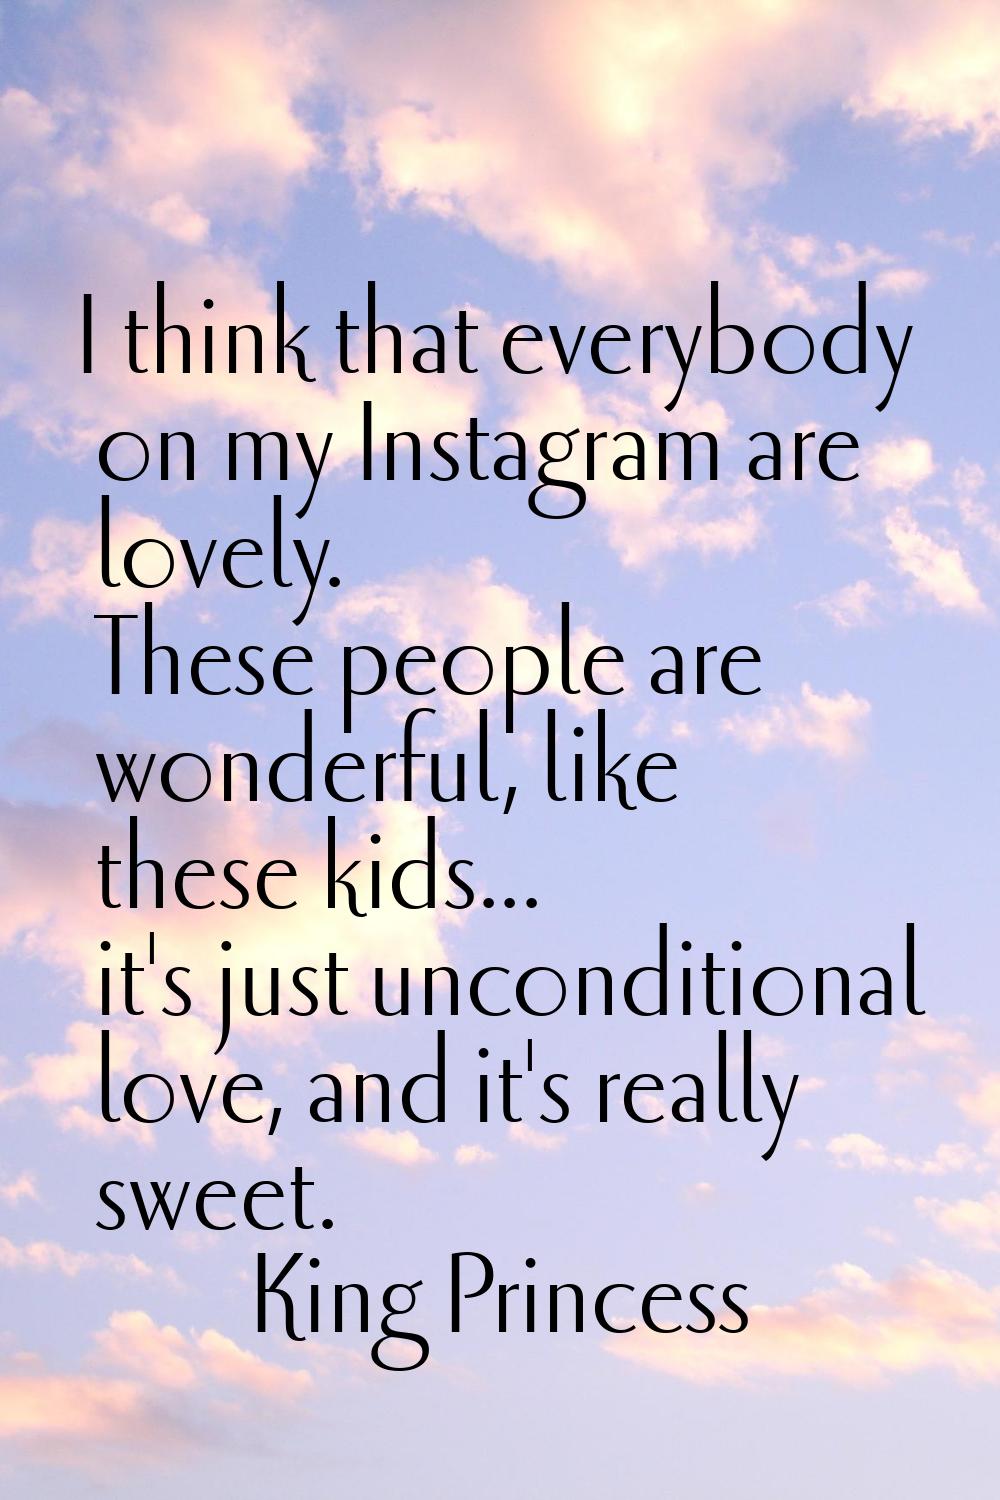 I think that everybody on my Instagram are lovely. These people are wonderful, like these kids... i